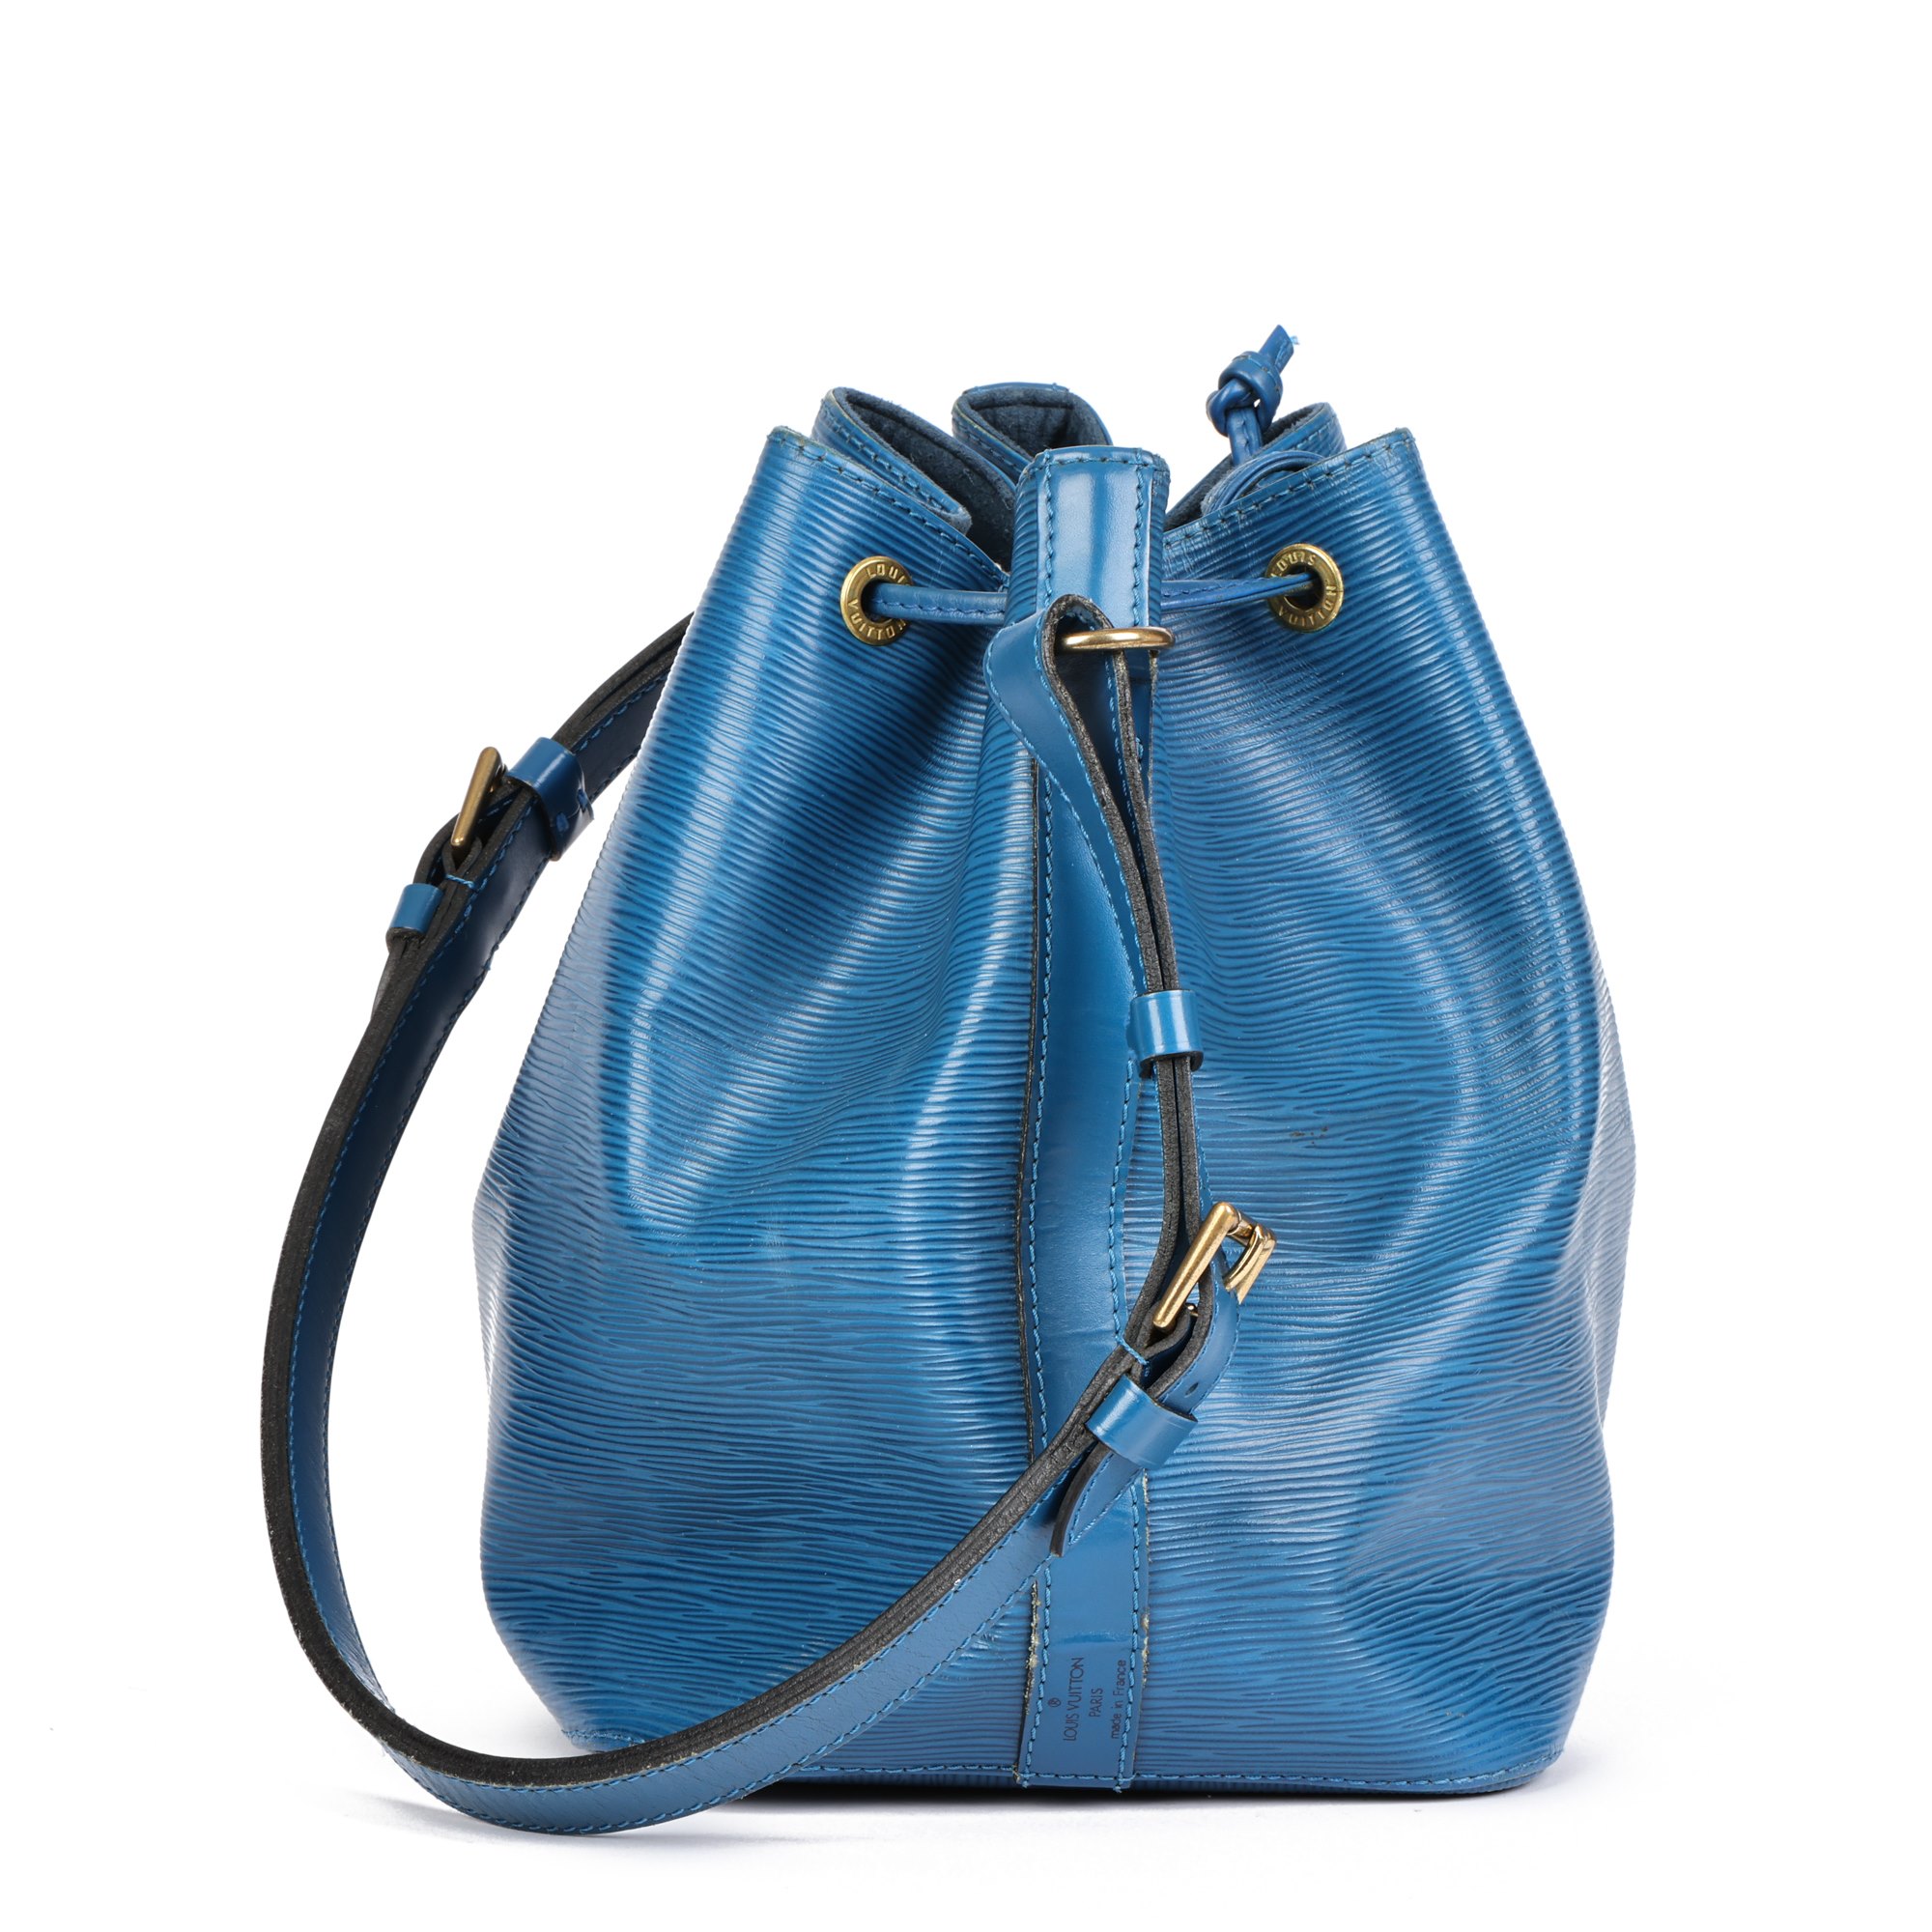 hoofdstad Octrooi Postbode Louis Vuitton Tas Blauwe Band | electricmall.com.ng